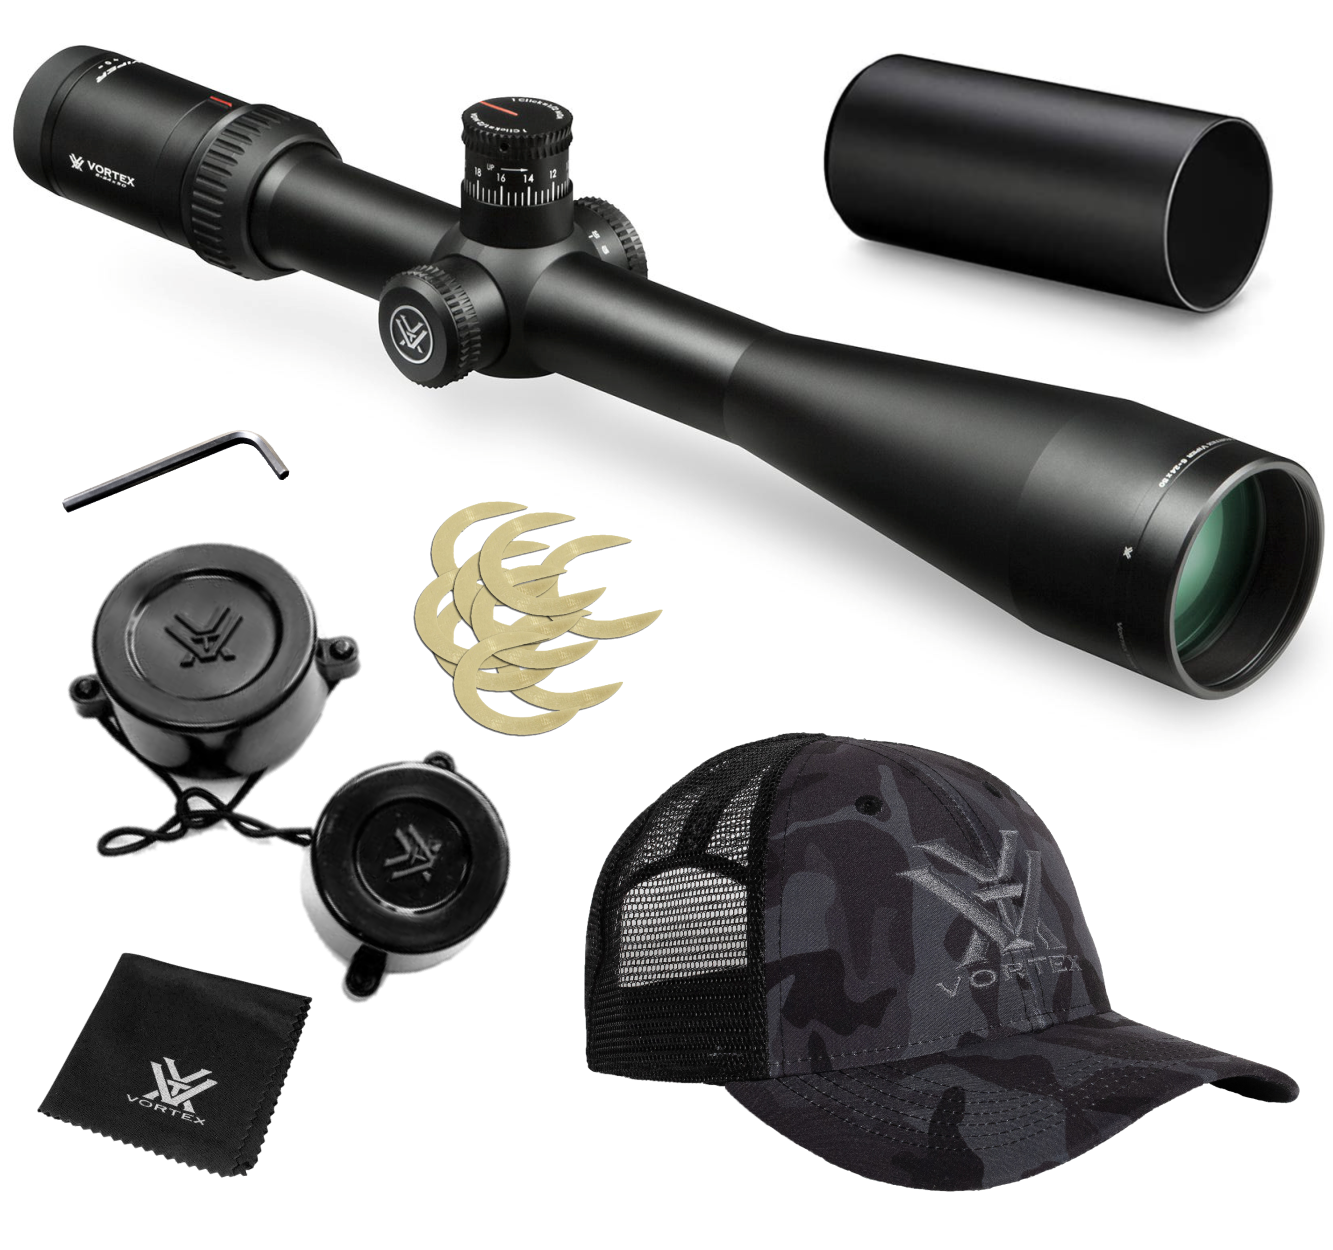 Vortex Optics Viper HSLR 6-24X50 XLR (MOA) Reticle First Focal Plane, 30 mm Tube with Free Hat Bundle - image 1 of 7